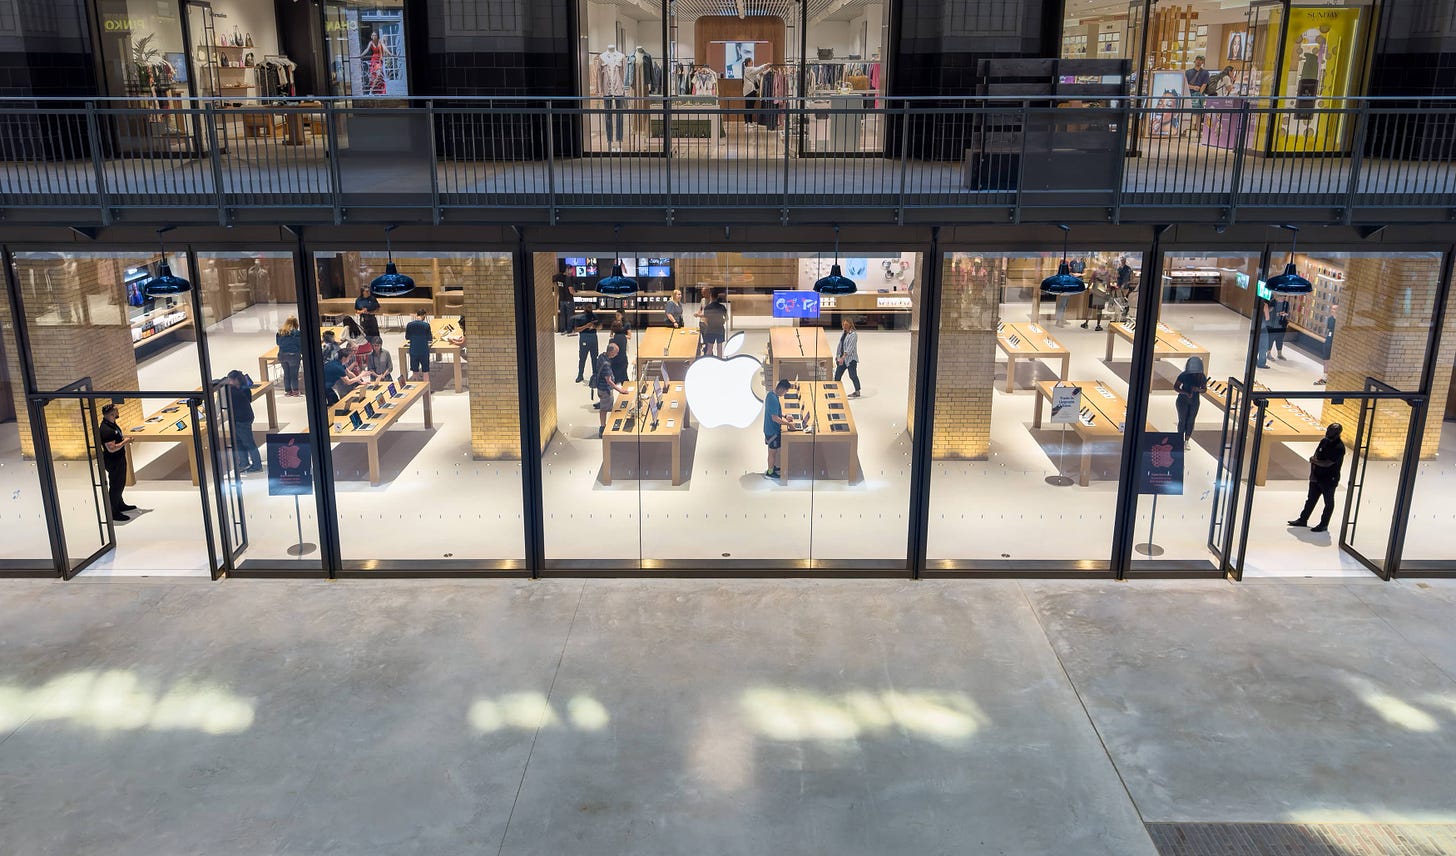 The storefront of Apple Battersea from an upper balcony. Customers move about the tables inside.